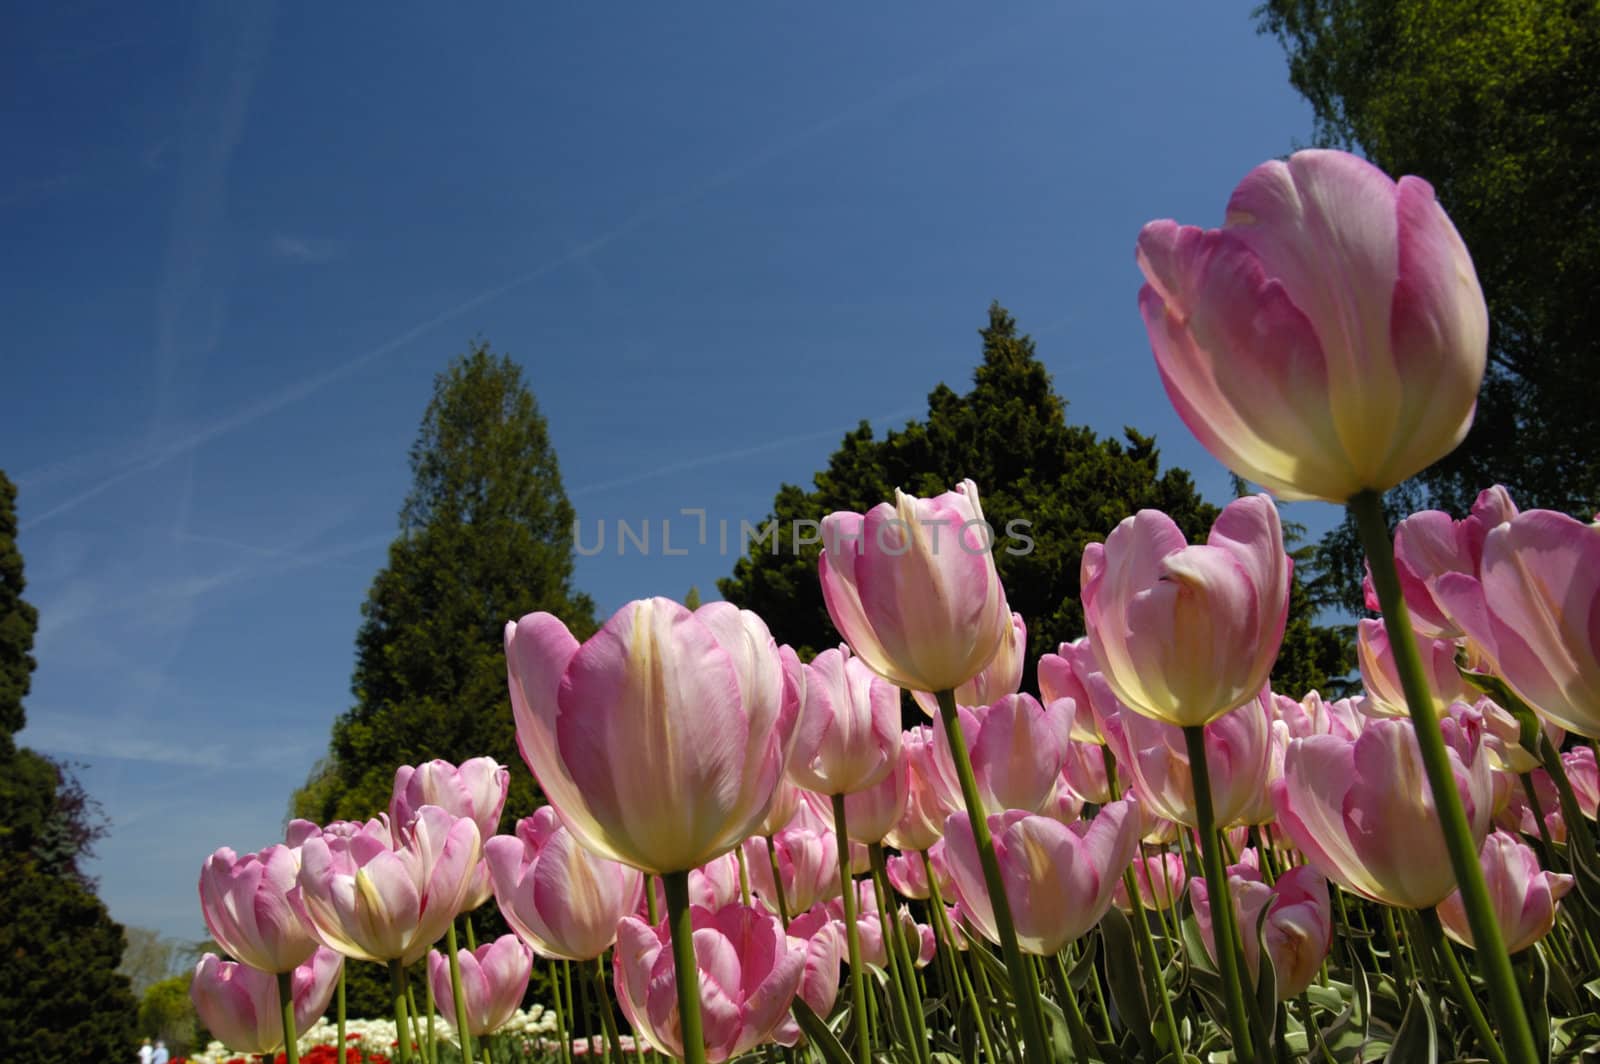 Tulips thrust their flowers high into a blue sky, streaked with vapour trails from passing airliners. Two small figures are just visible at the bottom L. Space for text in the sky.